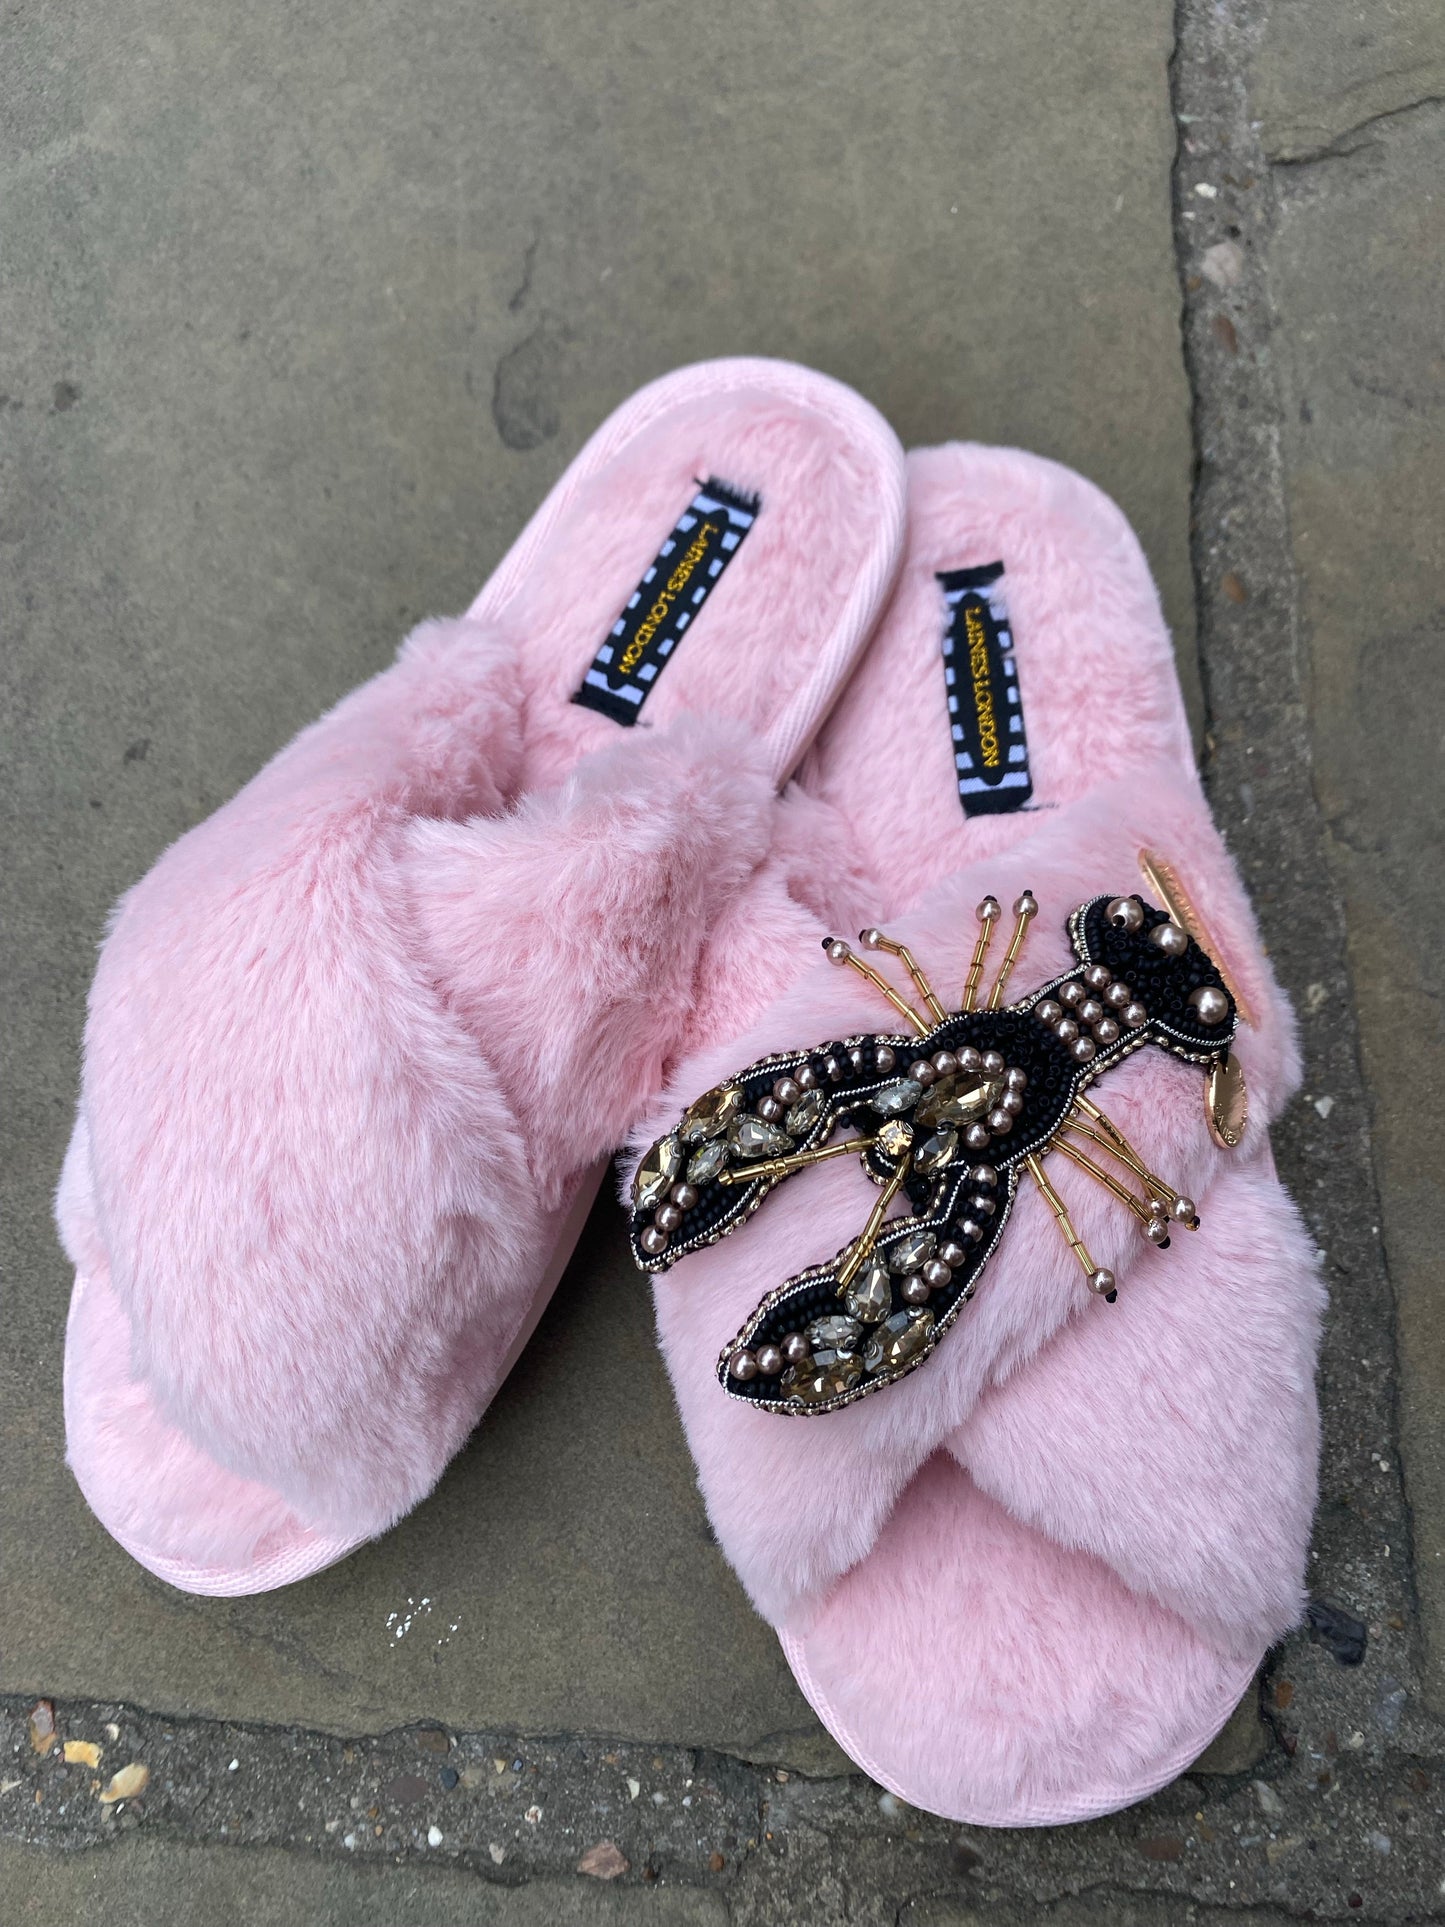 🖤Artisan Black & Gold Lobster on Classic Pink Slippers🖤